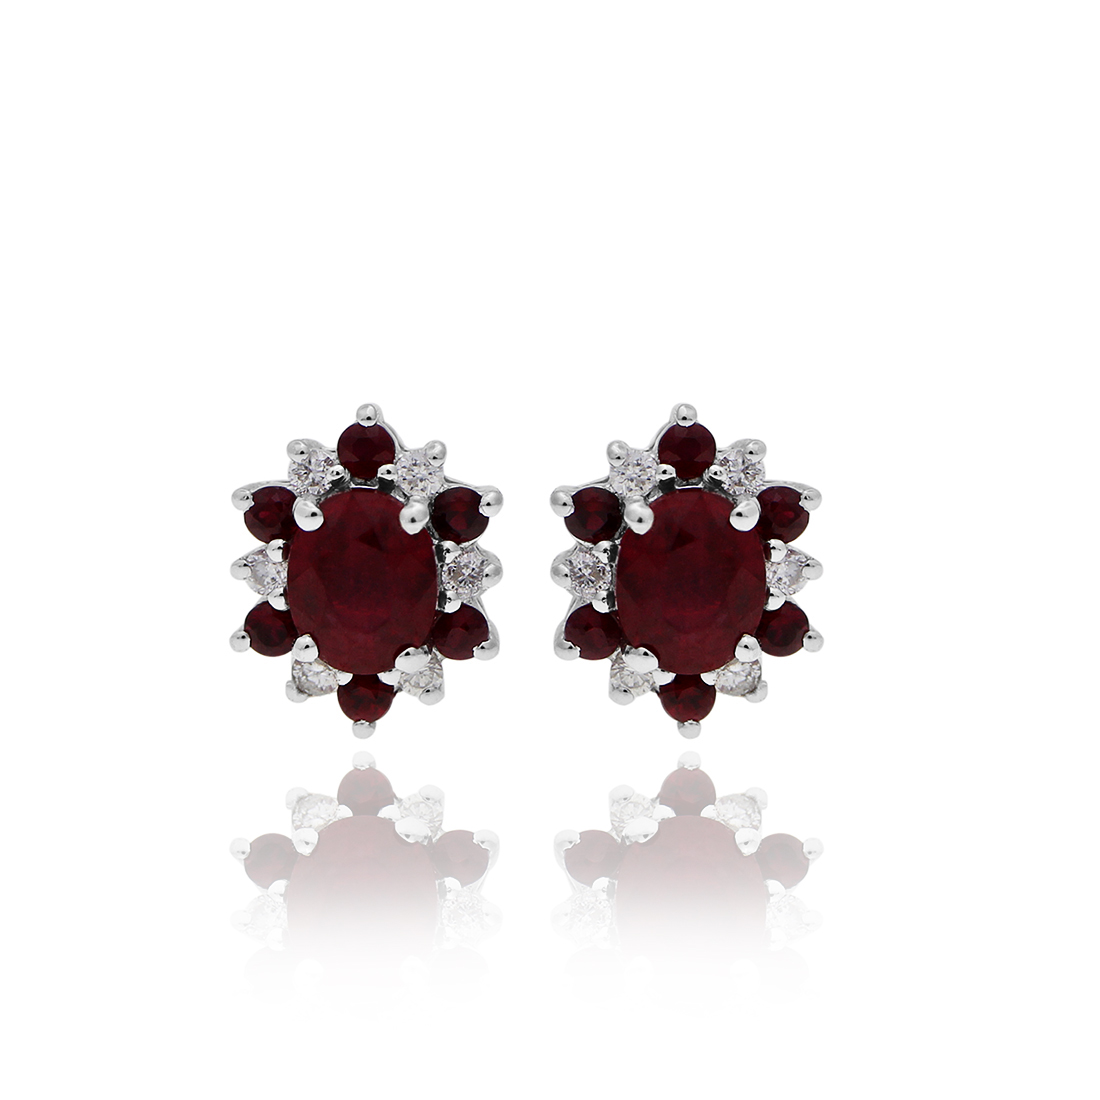 Vintage Classic Earring E1731-RB